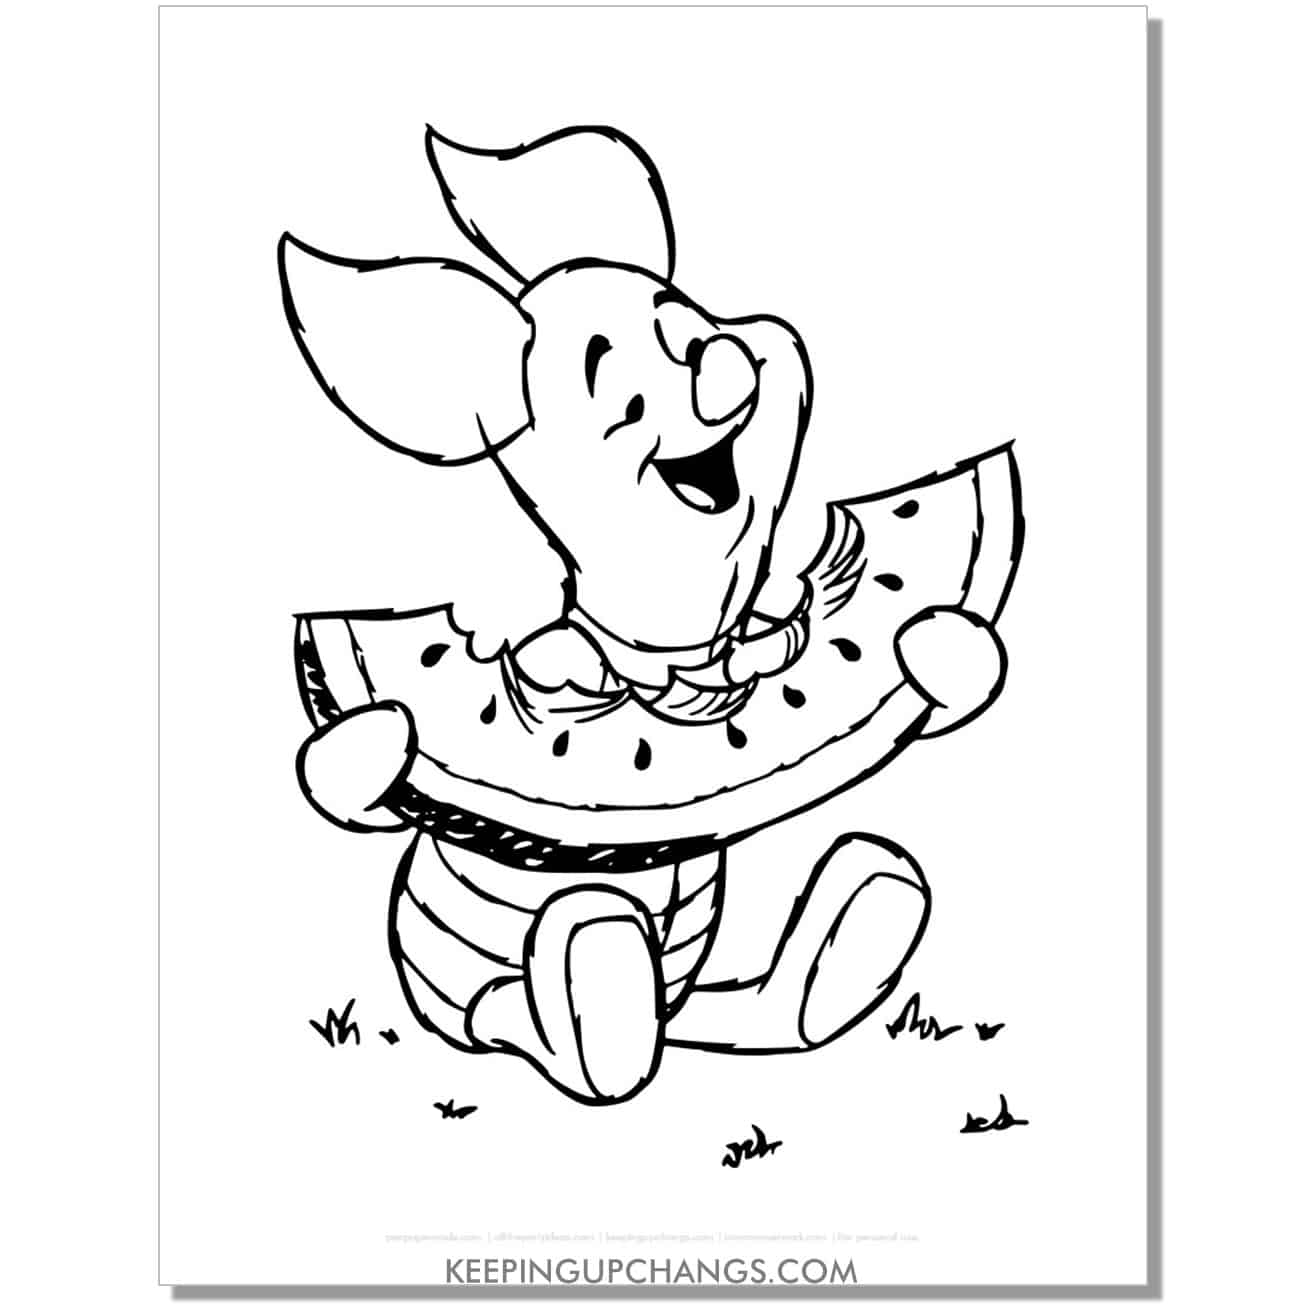 piglet eating watermelon coloring page, sheet.